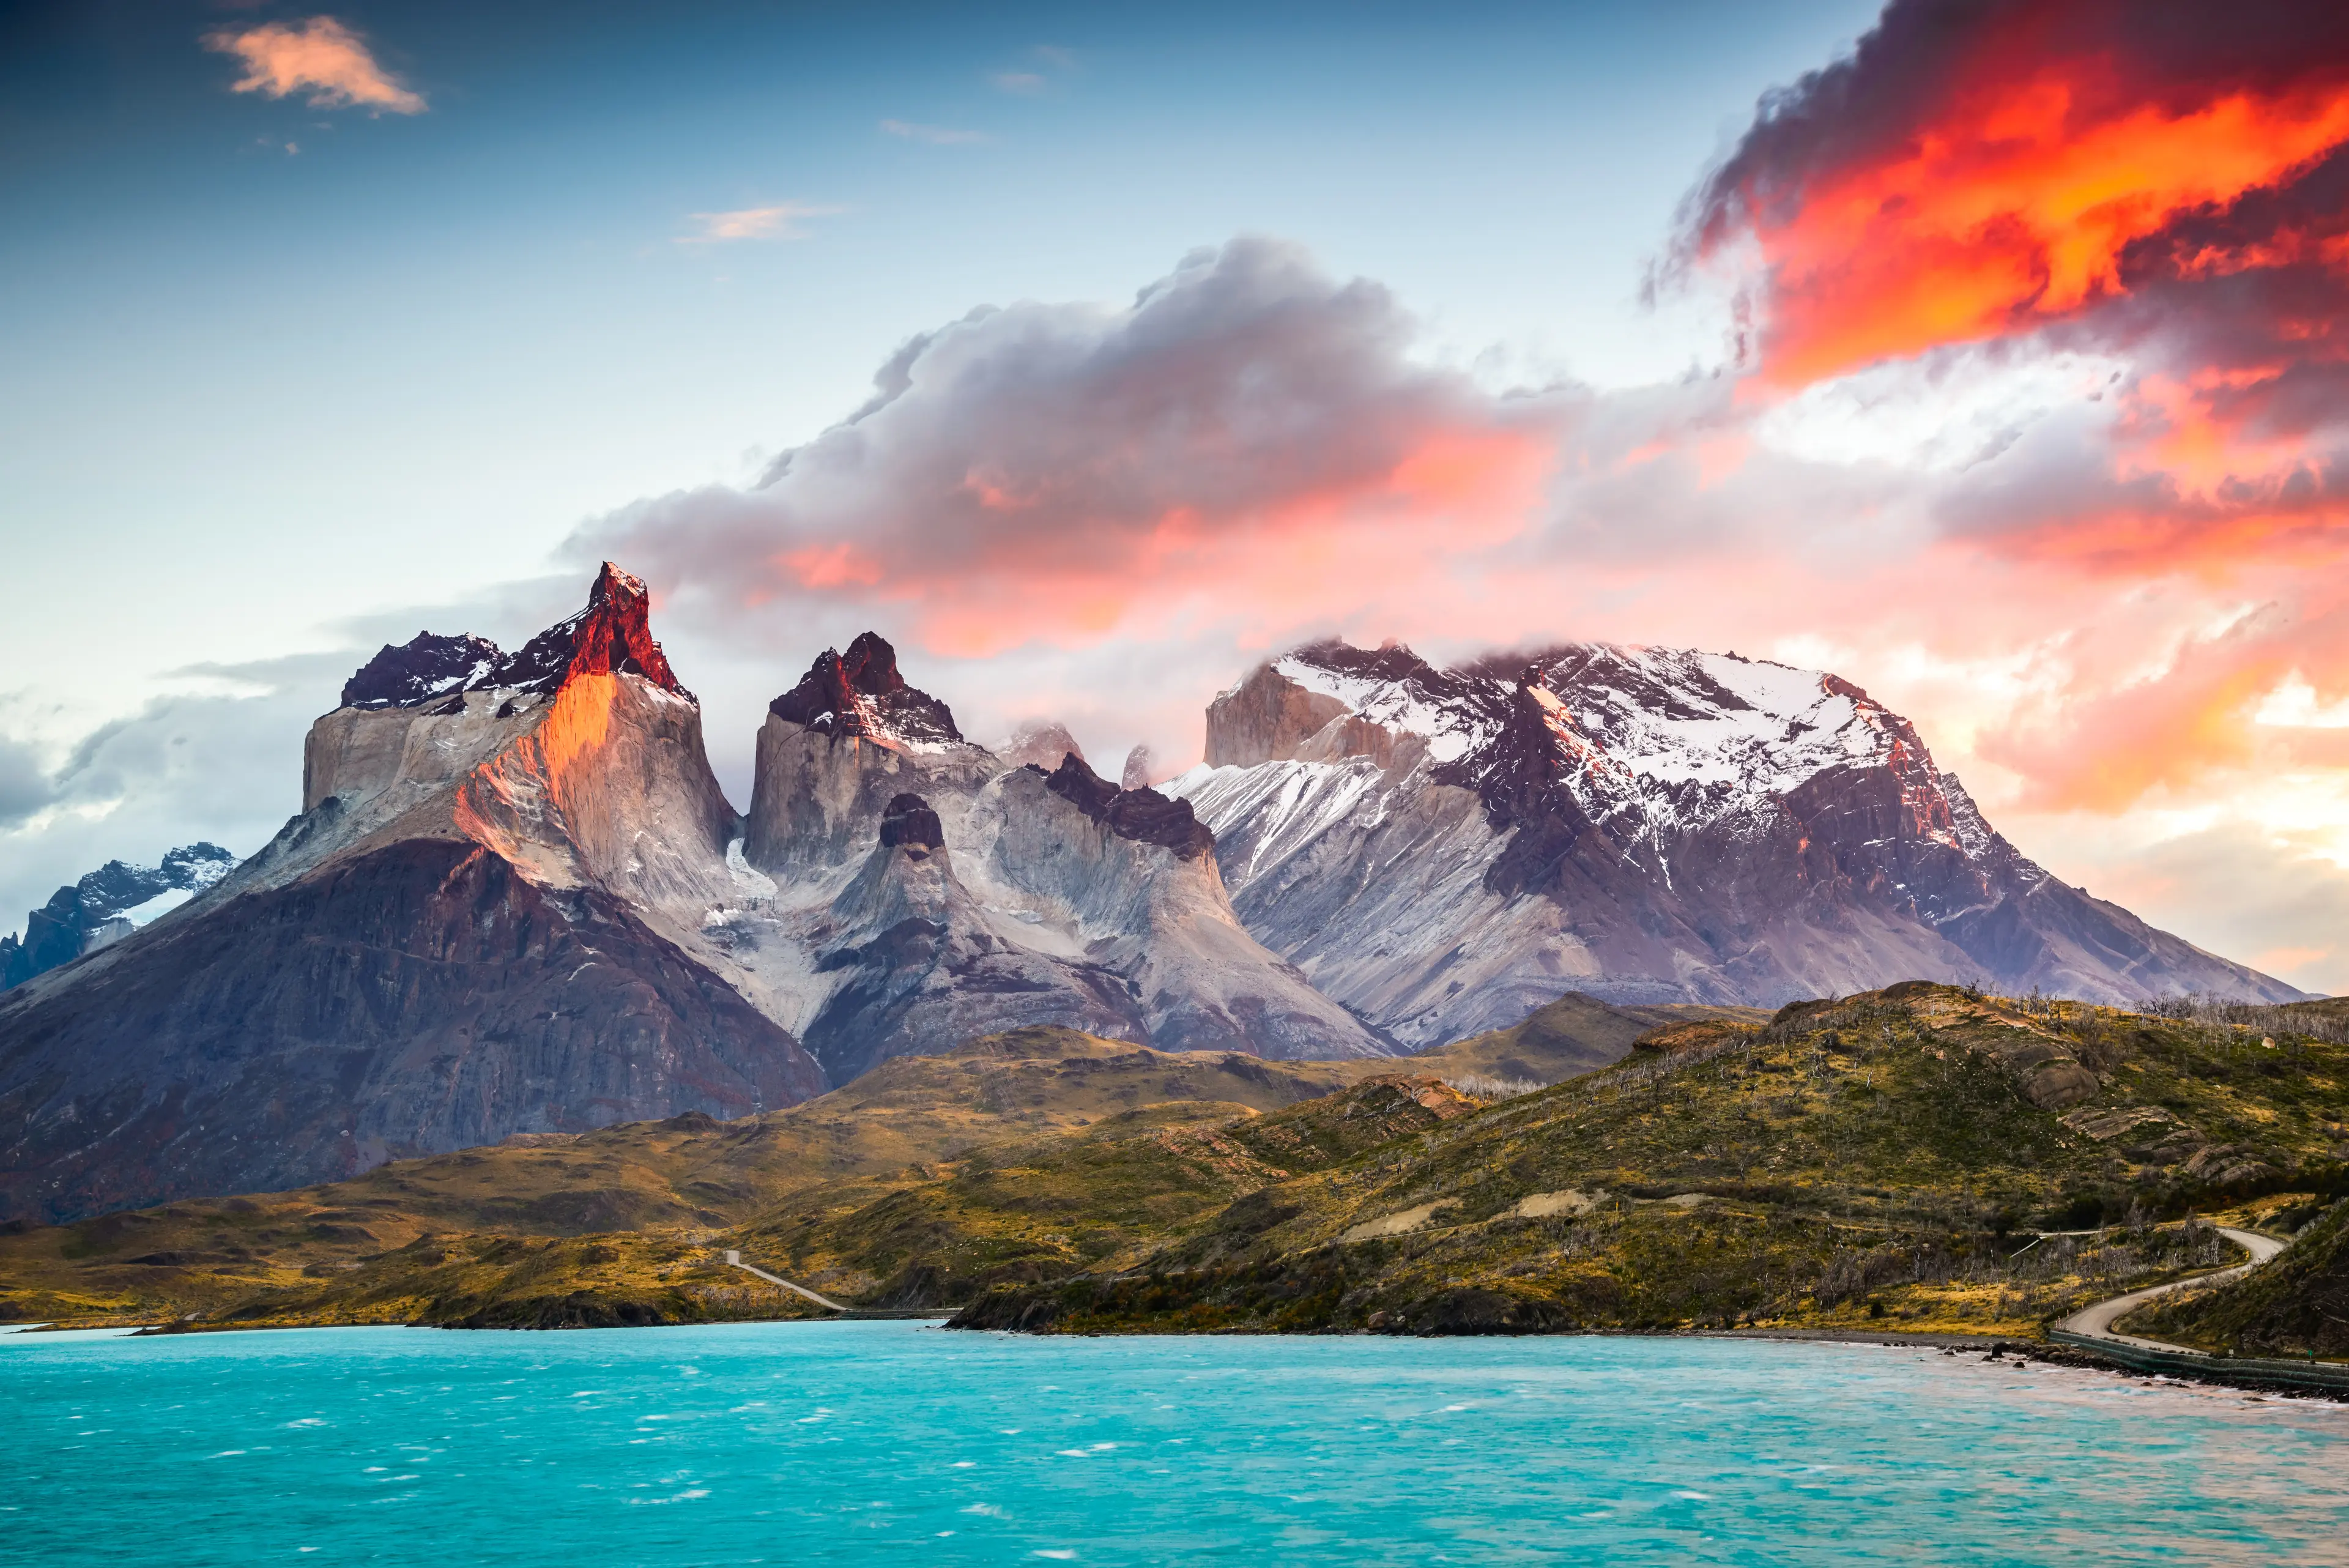 1-Day Adventure in Chilean Patagonia, Chile